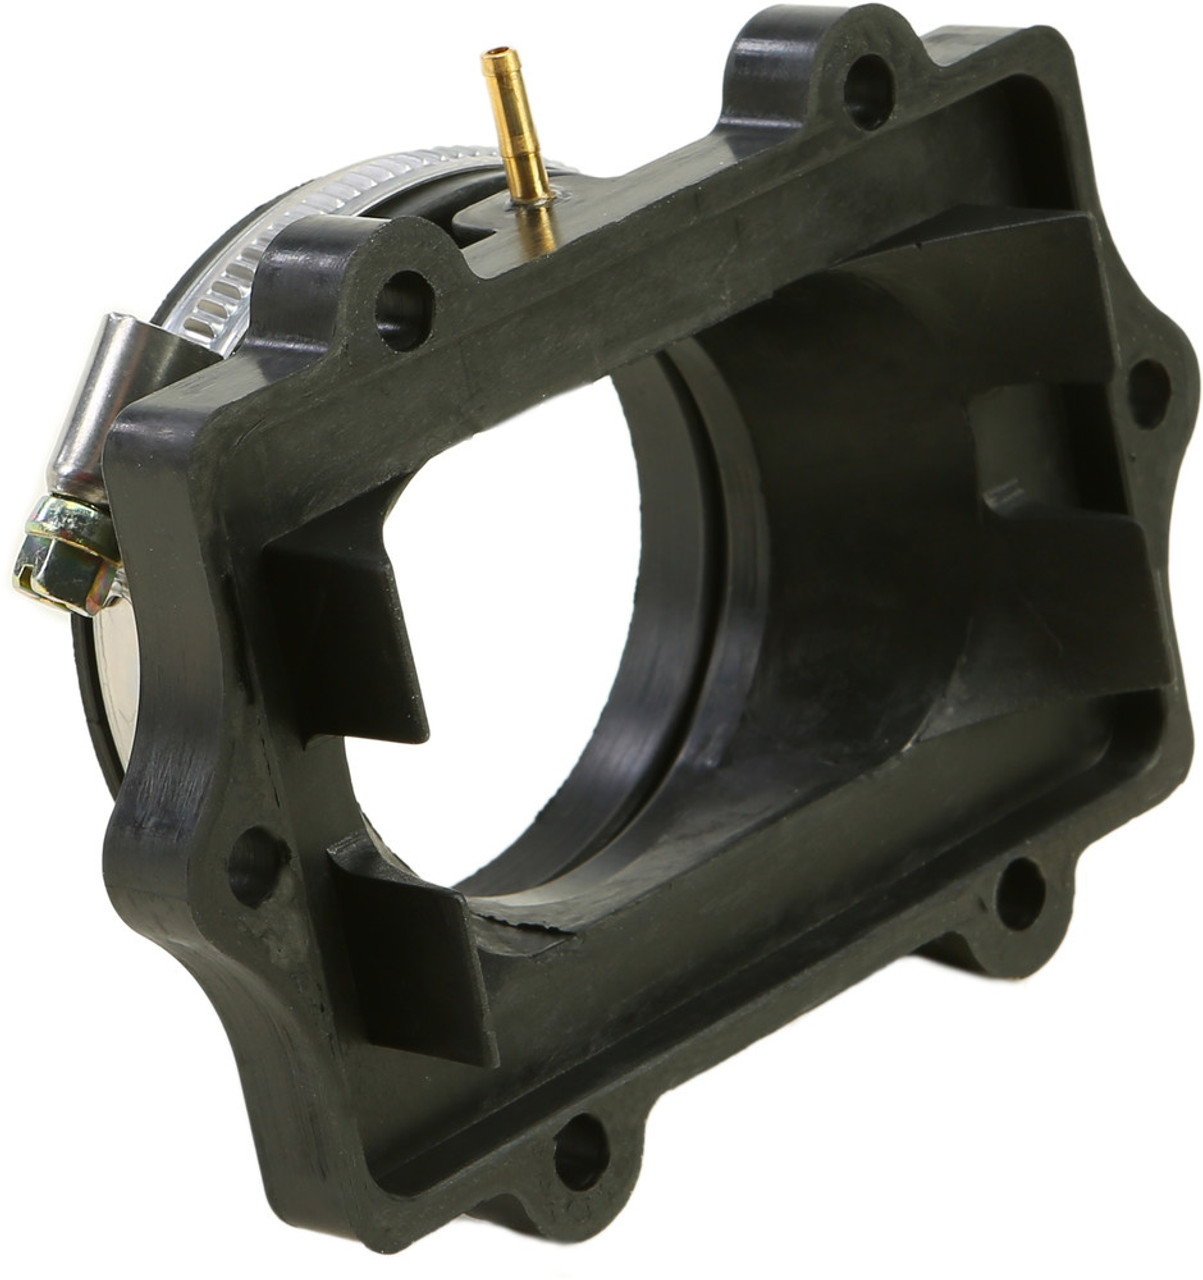 Replacement Intake Mounting Flange compatible with Arctic Cat Part# 12-14816 OEM# 0907-003